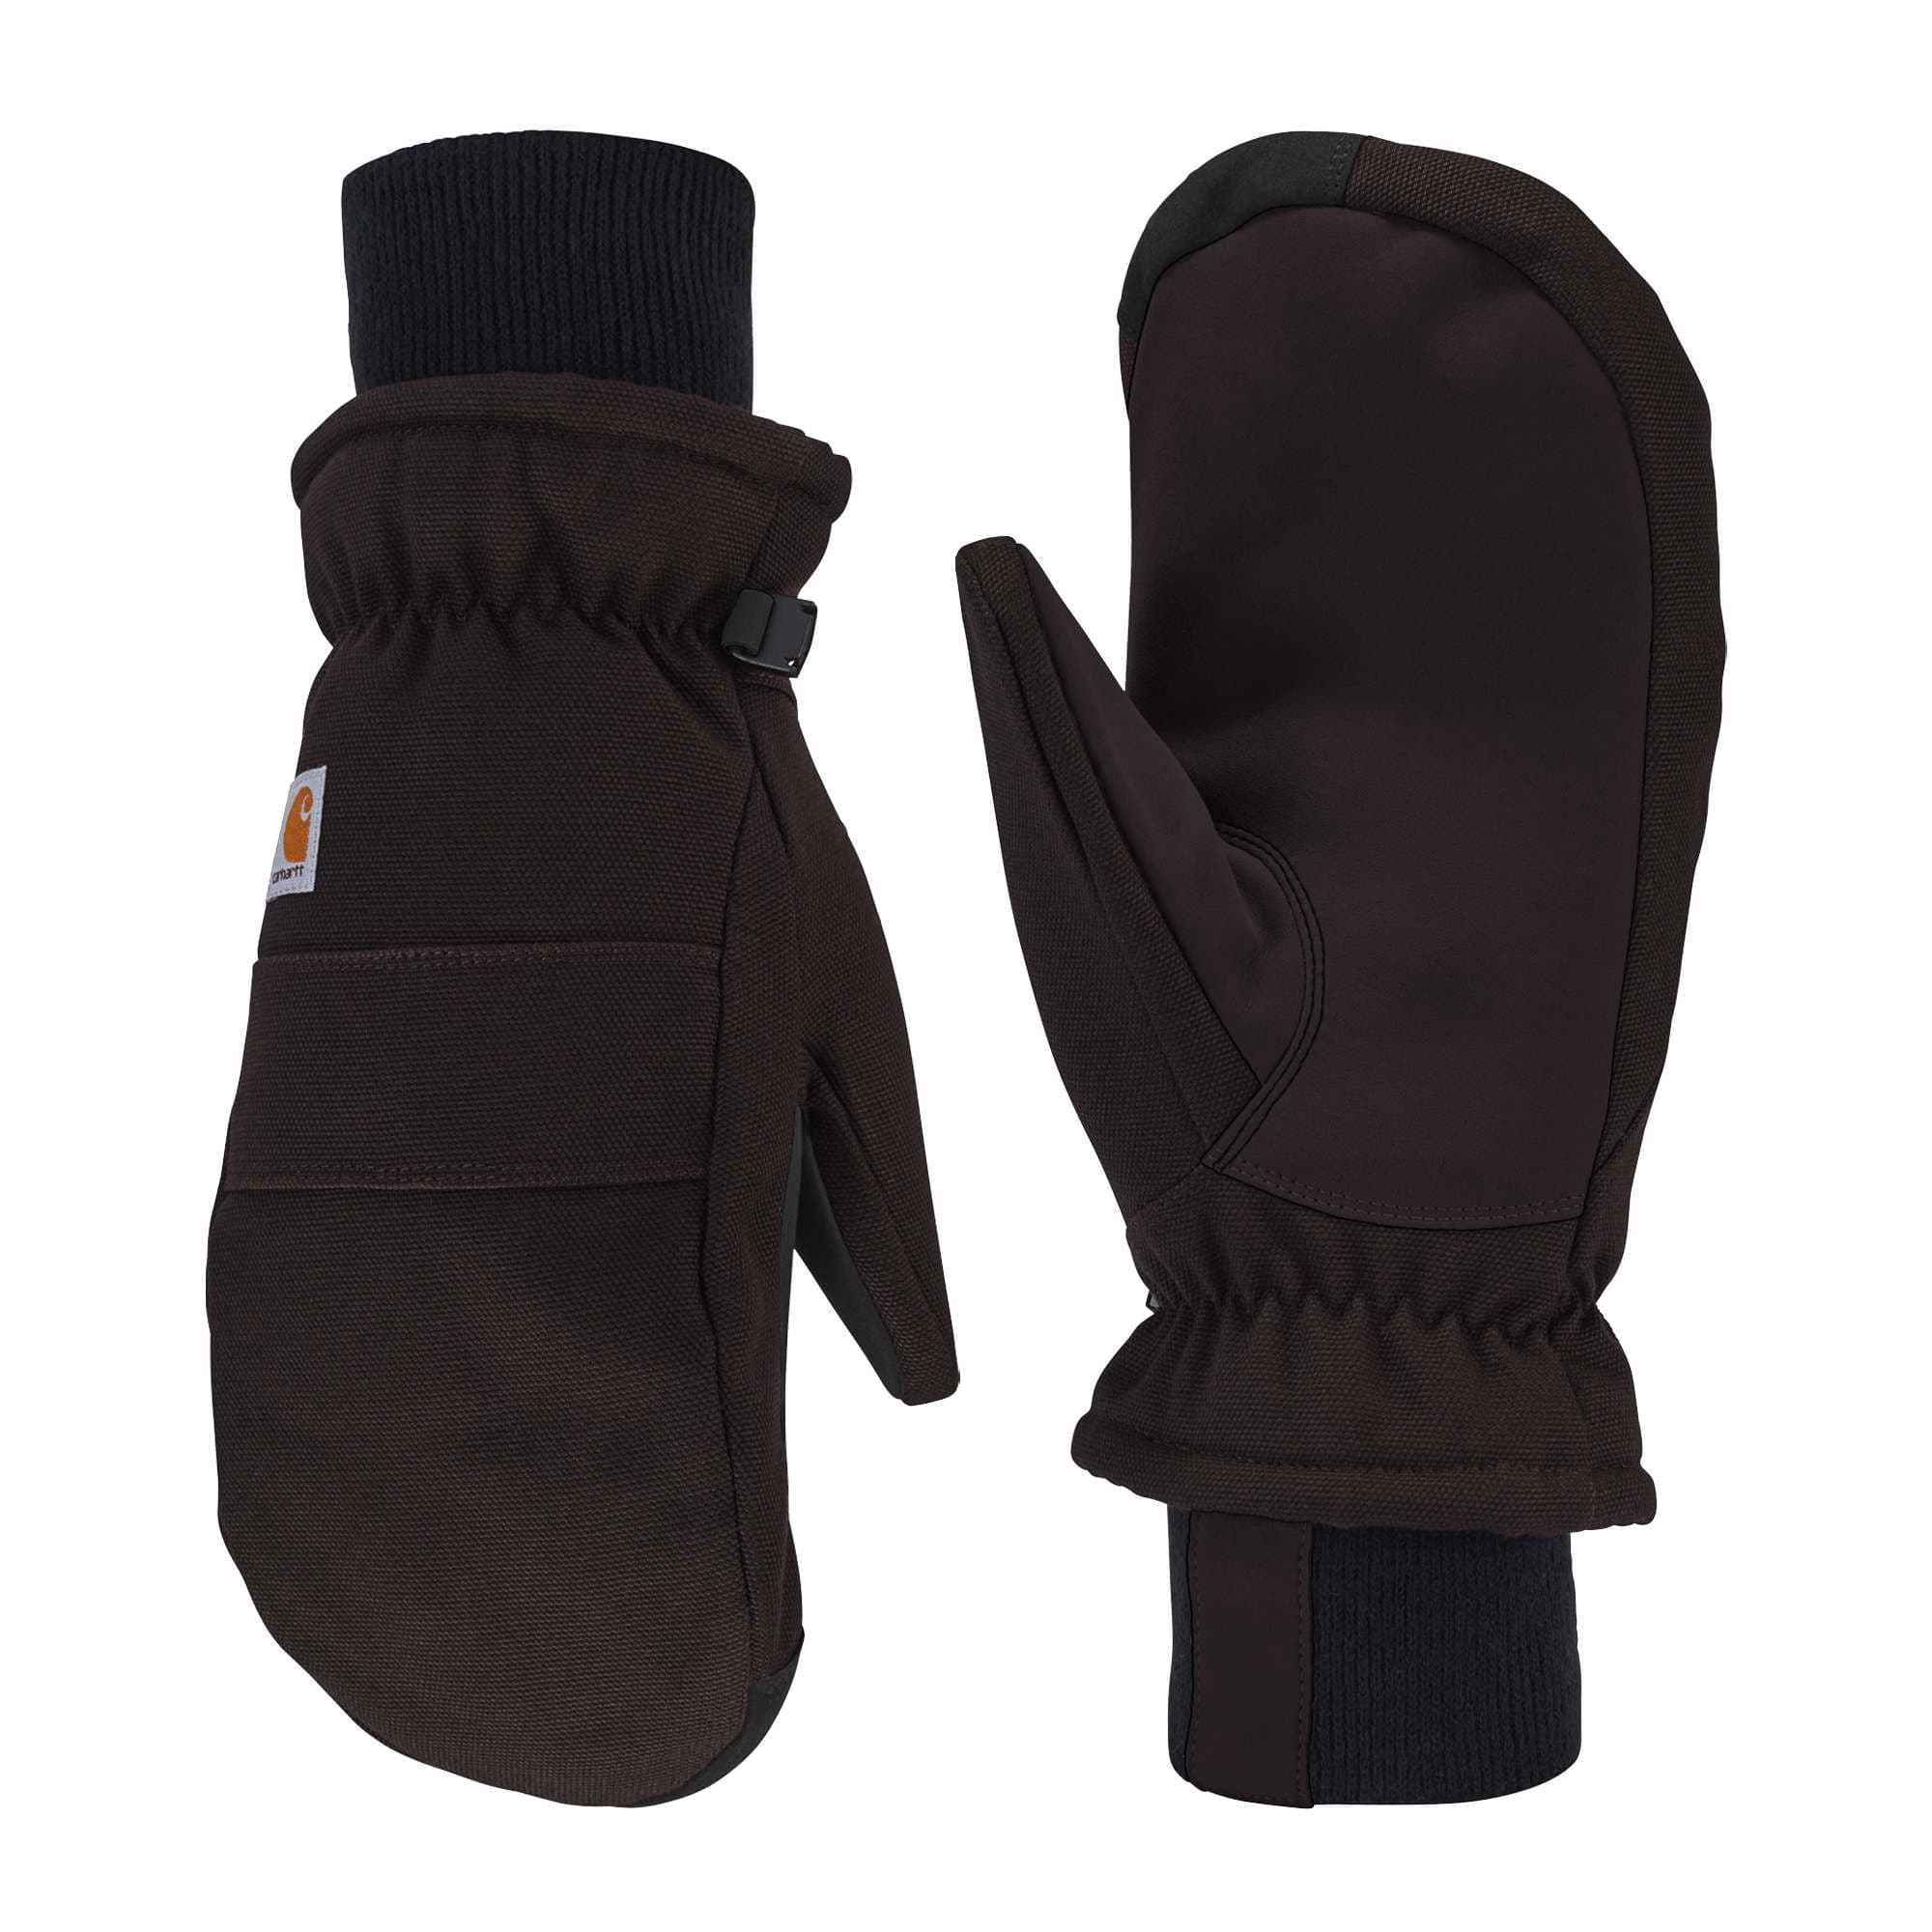 Insulated Duck Synthetic Leather Knit Cuff Mitt